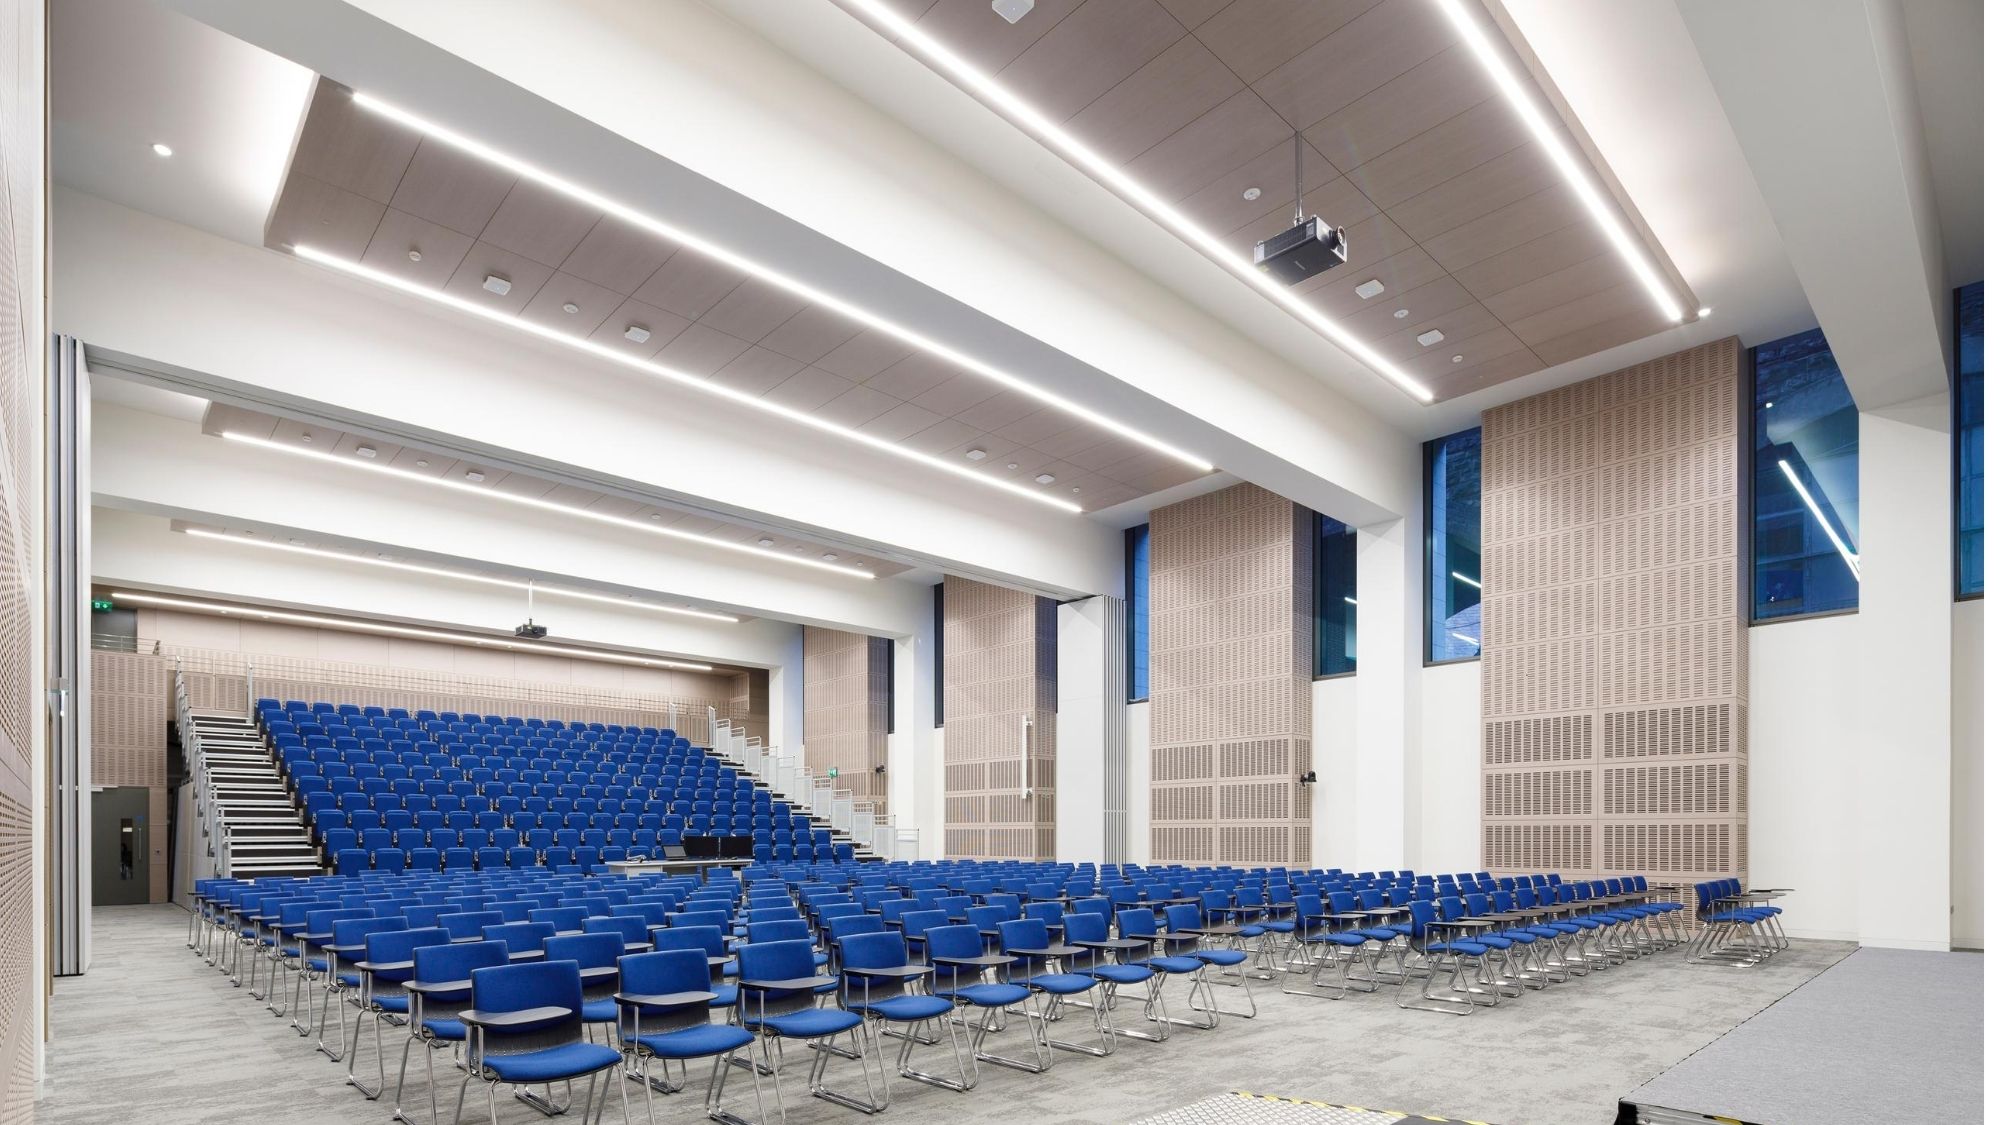 Rows of blue chairs in the 600-seat auditorium at Trinity Business School